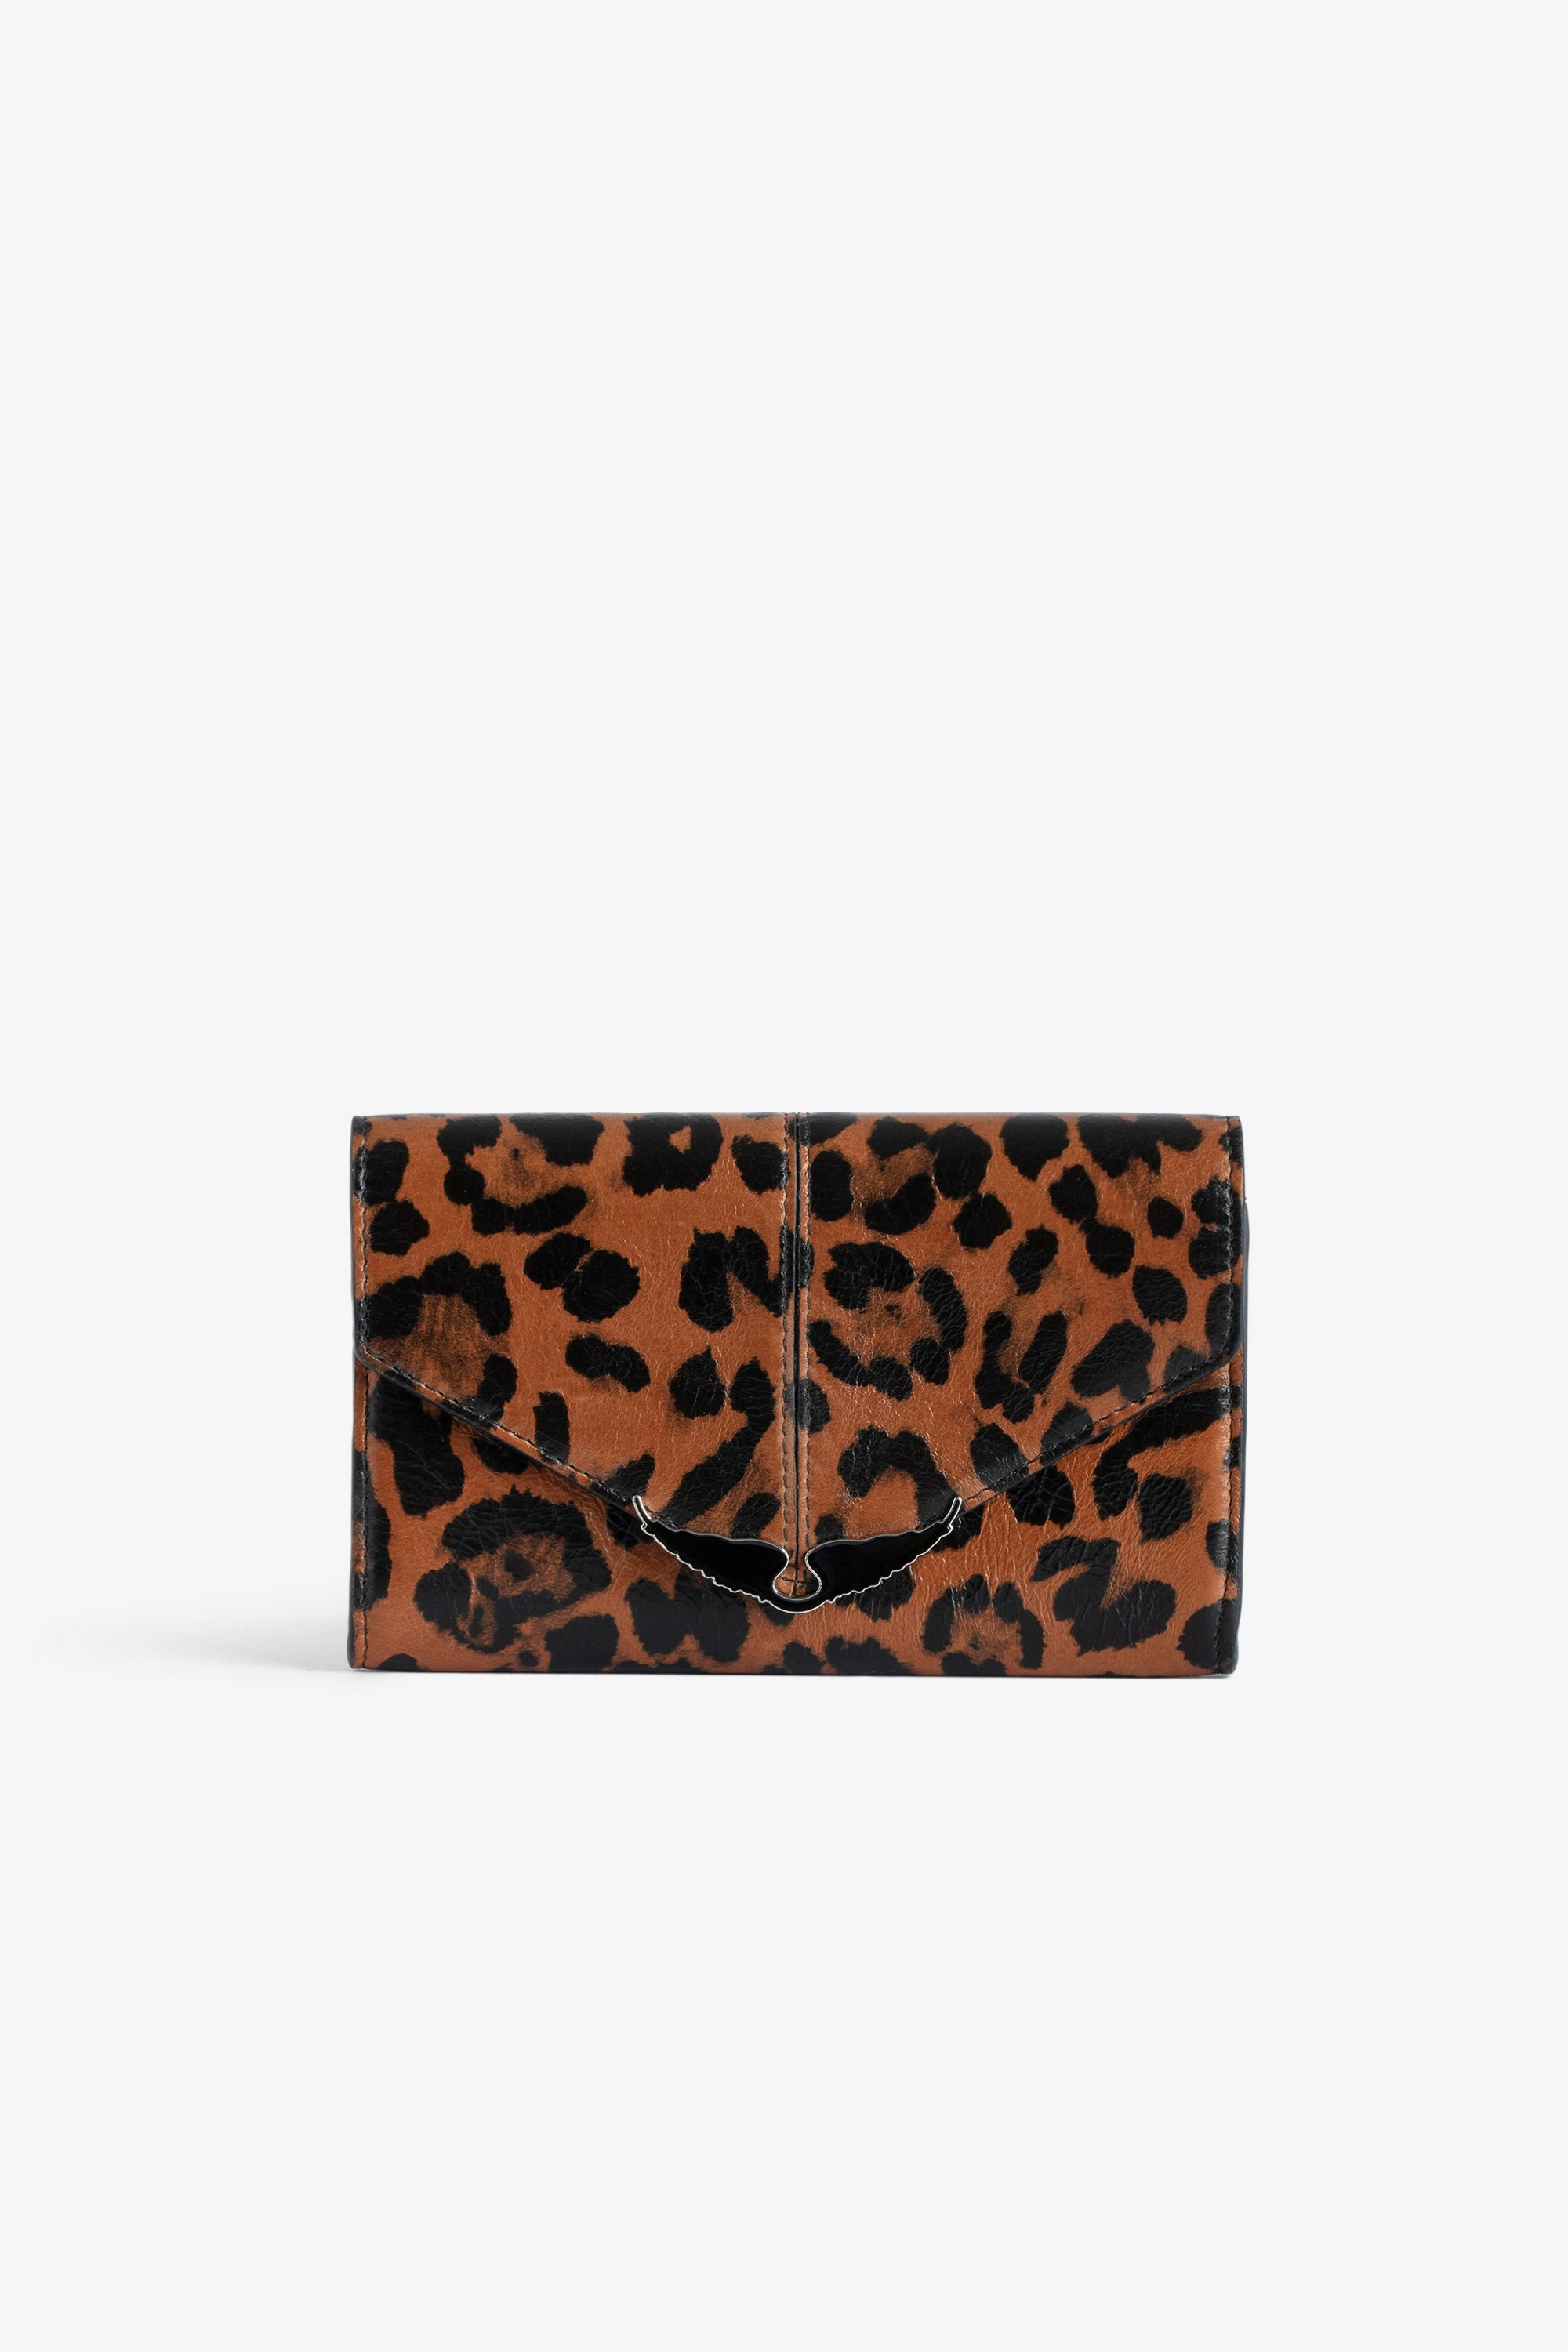 Borderline Wallet Women’s brown leopard-print patent leather wallet with wings charm.